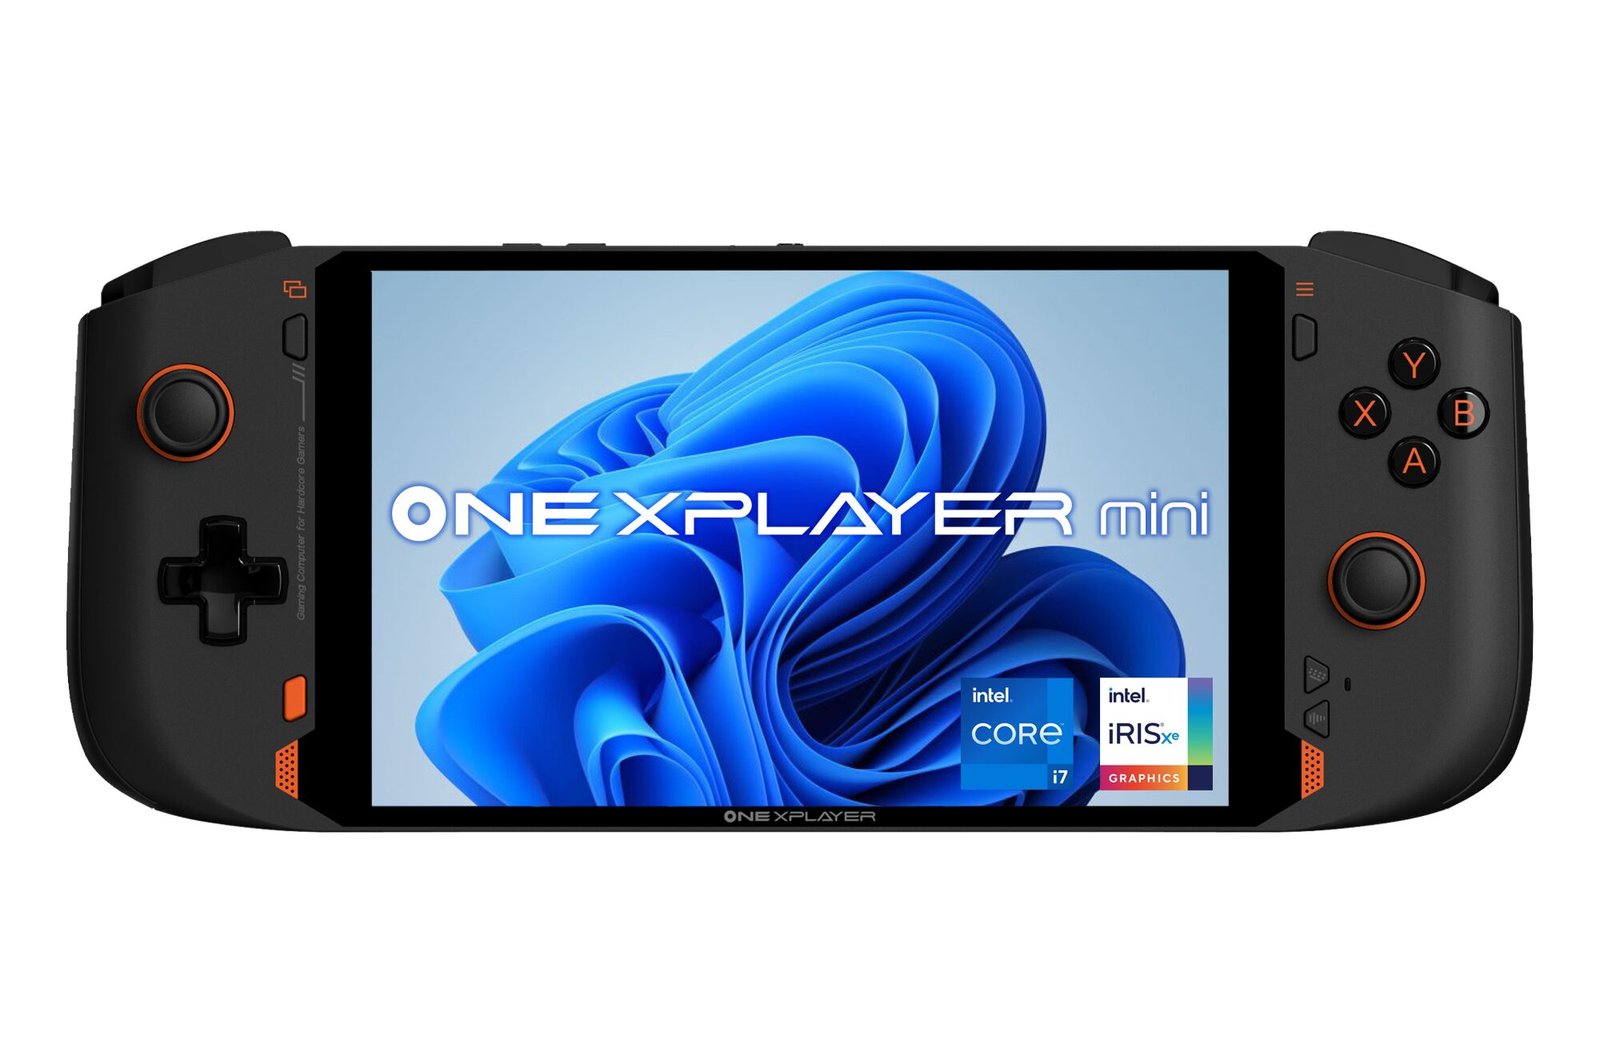 ONEXPLAYER-mini-launched-with-Intel-Core-i7-1195G7-processor-in-Japan